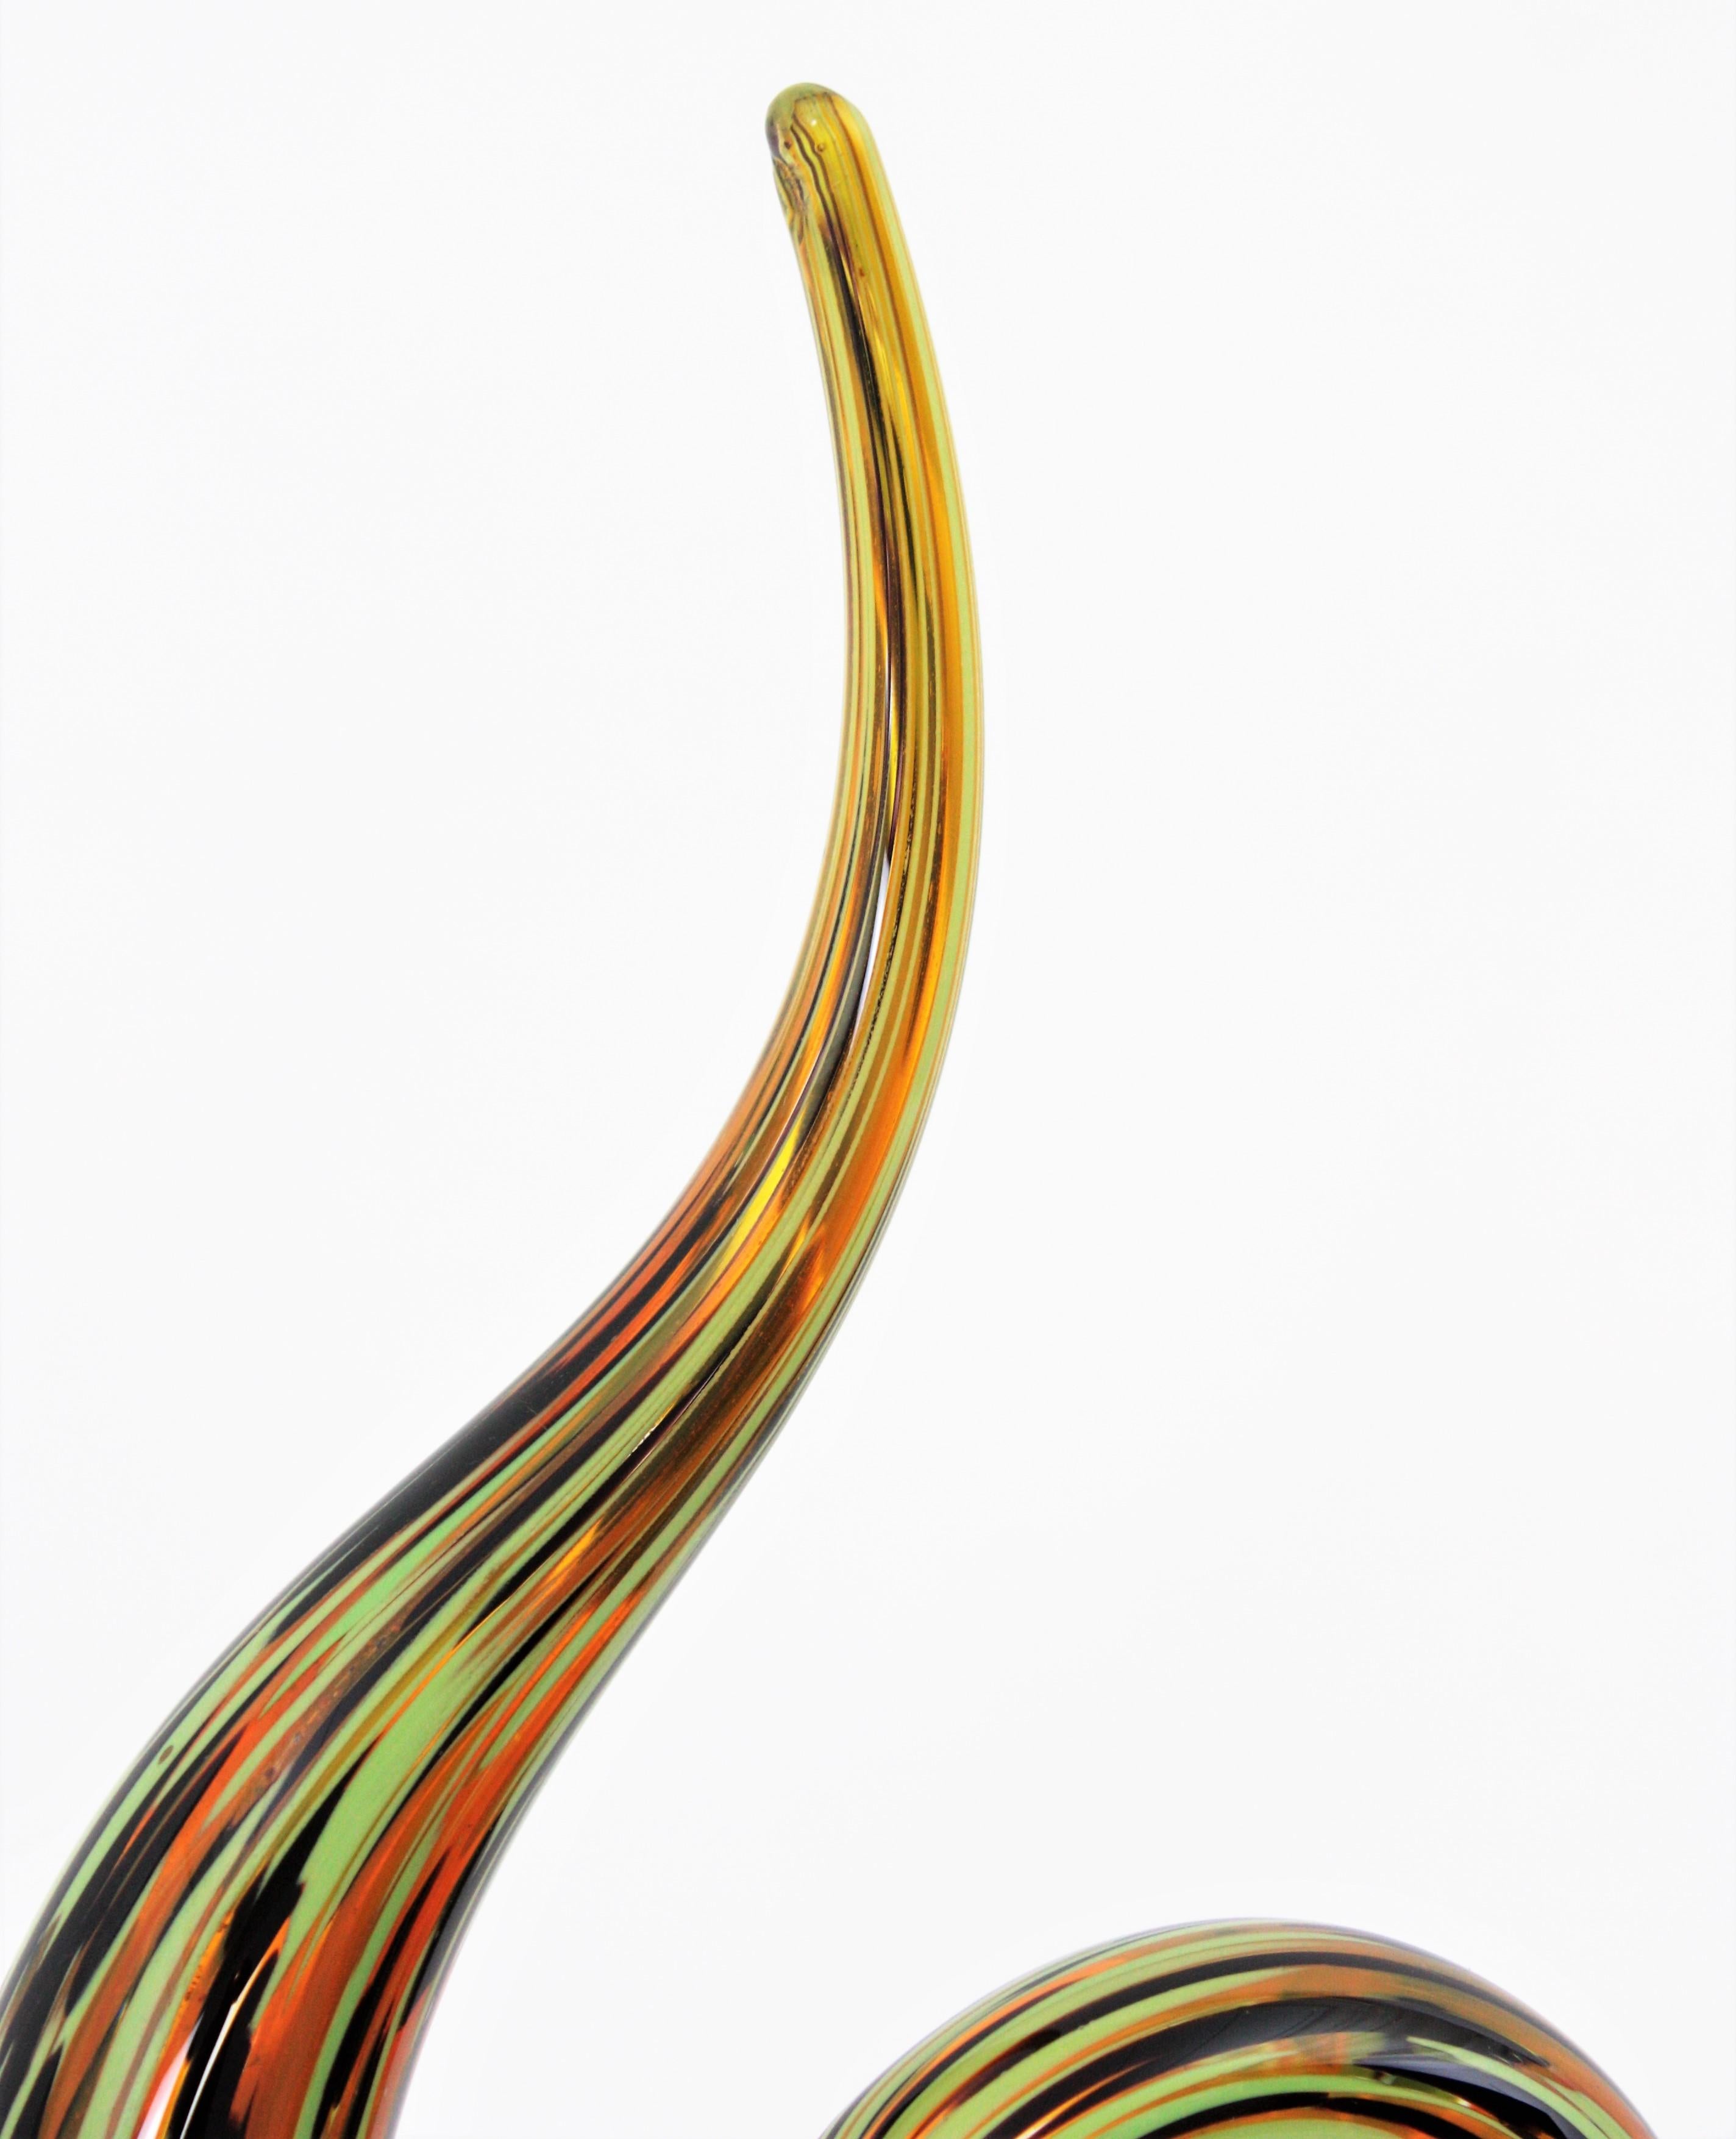 Murano Art Glass Multi Color Spiral Paperweight Sculpture, Italy, 1960s For Sale 1